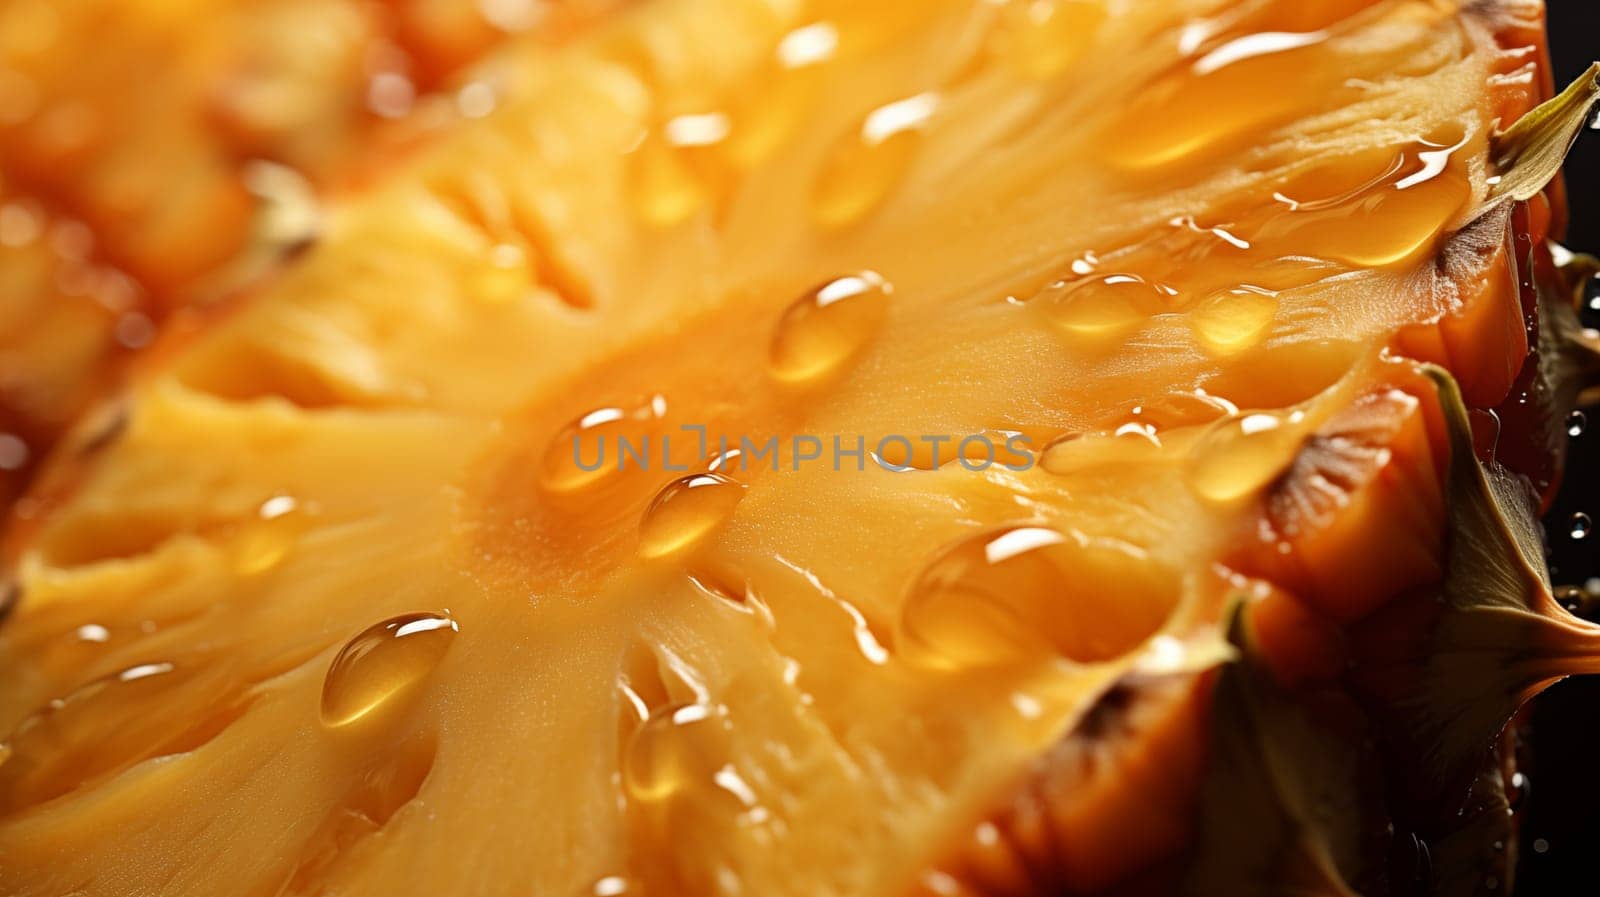 Close-up of a cut of a fresh pineapple fruit with drops of juice.